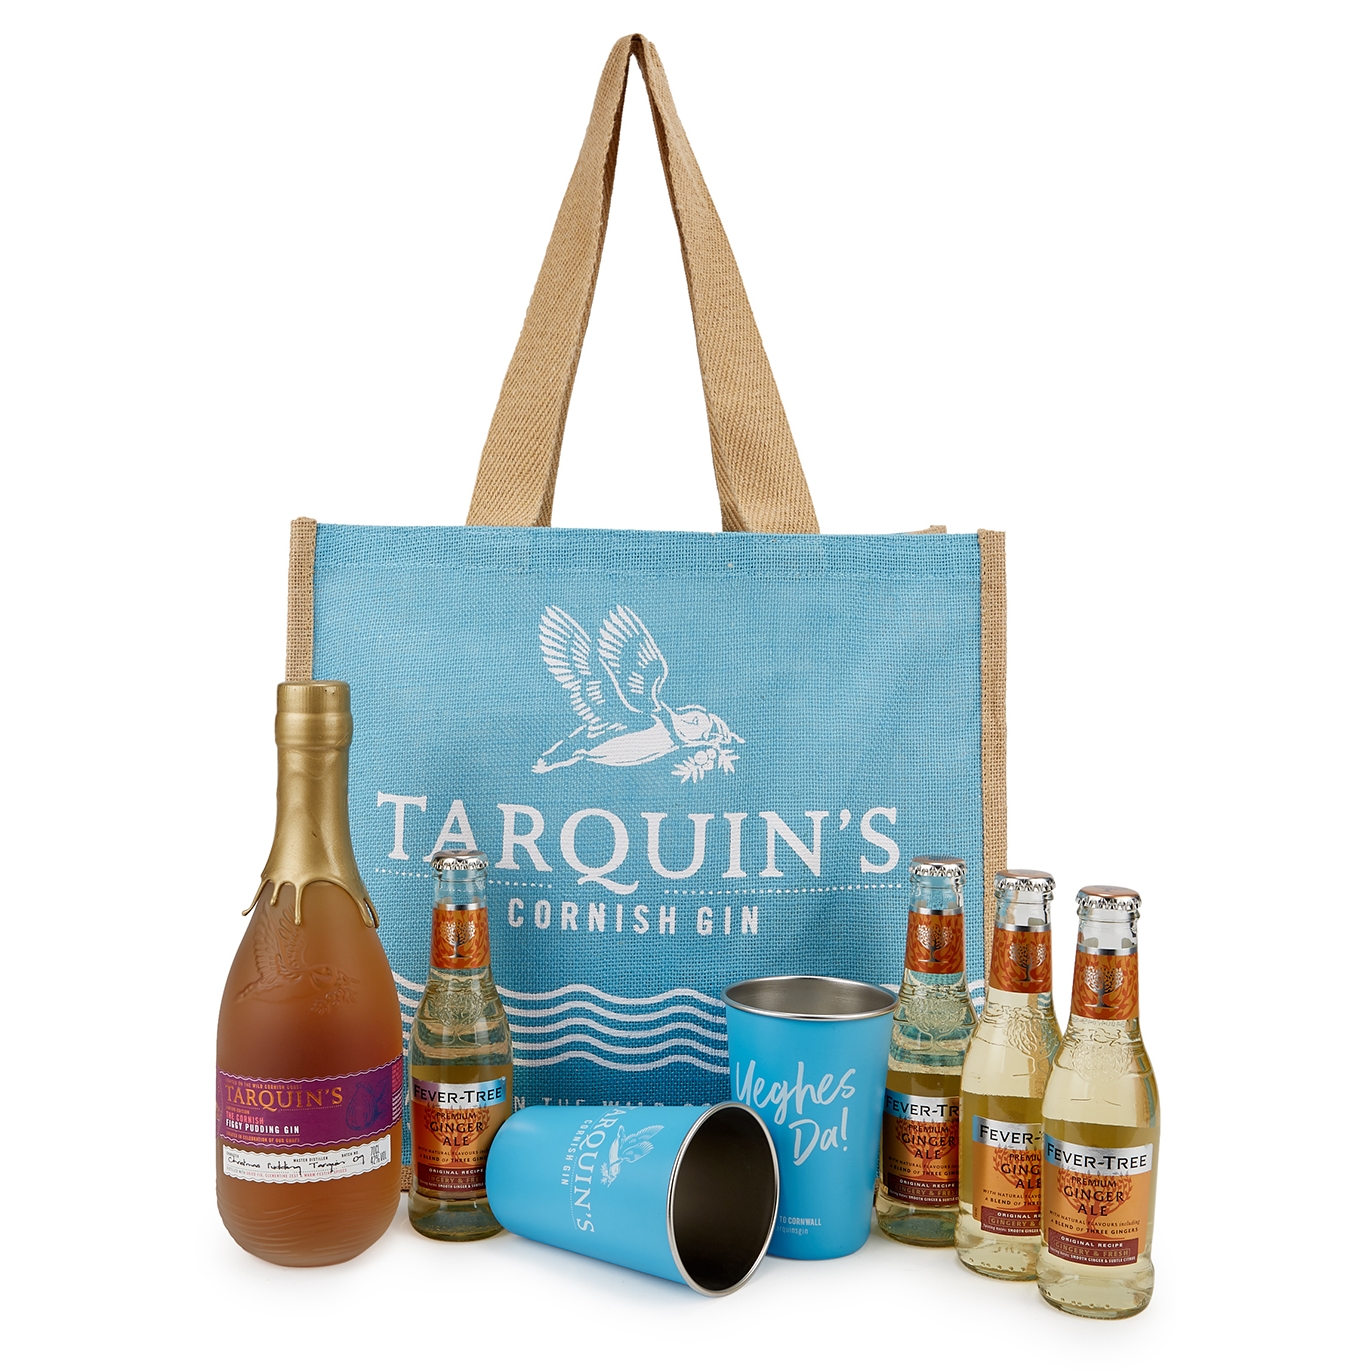 Tarquin's Cornish Gin, Figgy Pudding Gin, Ginger Ale & Tin Cups Bag